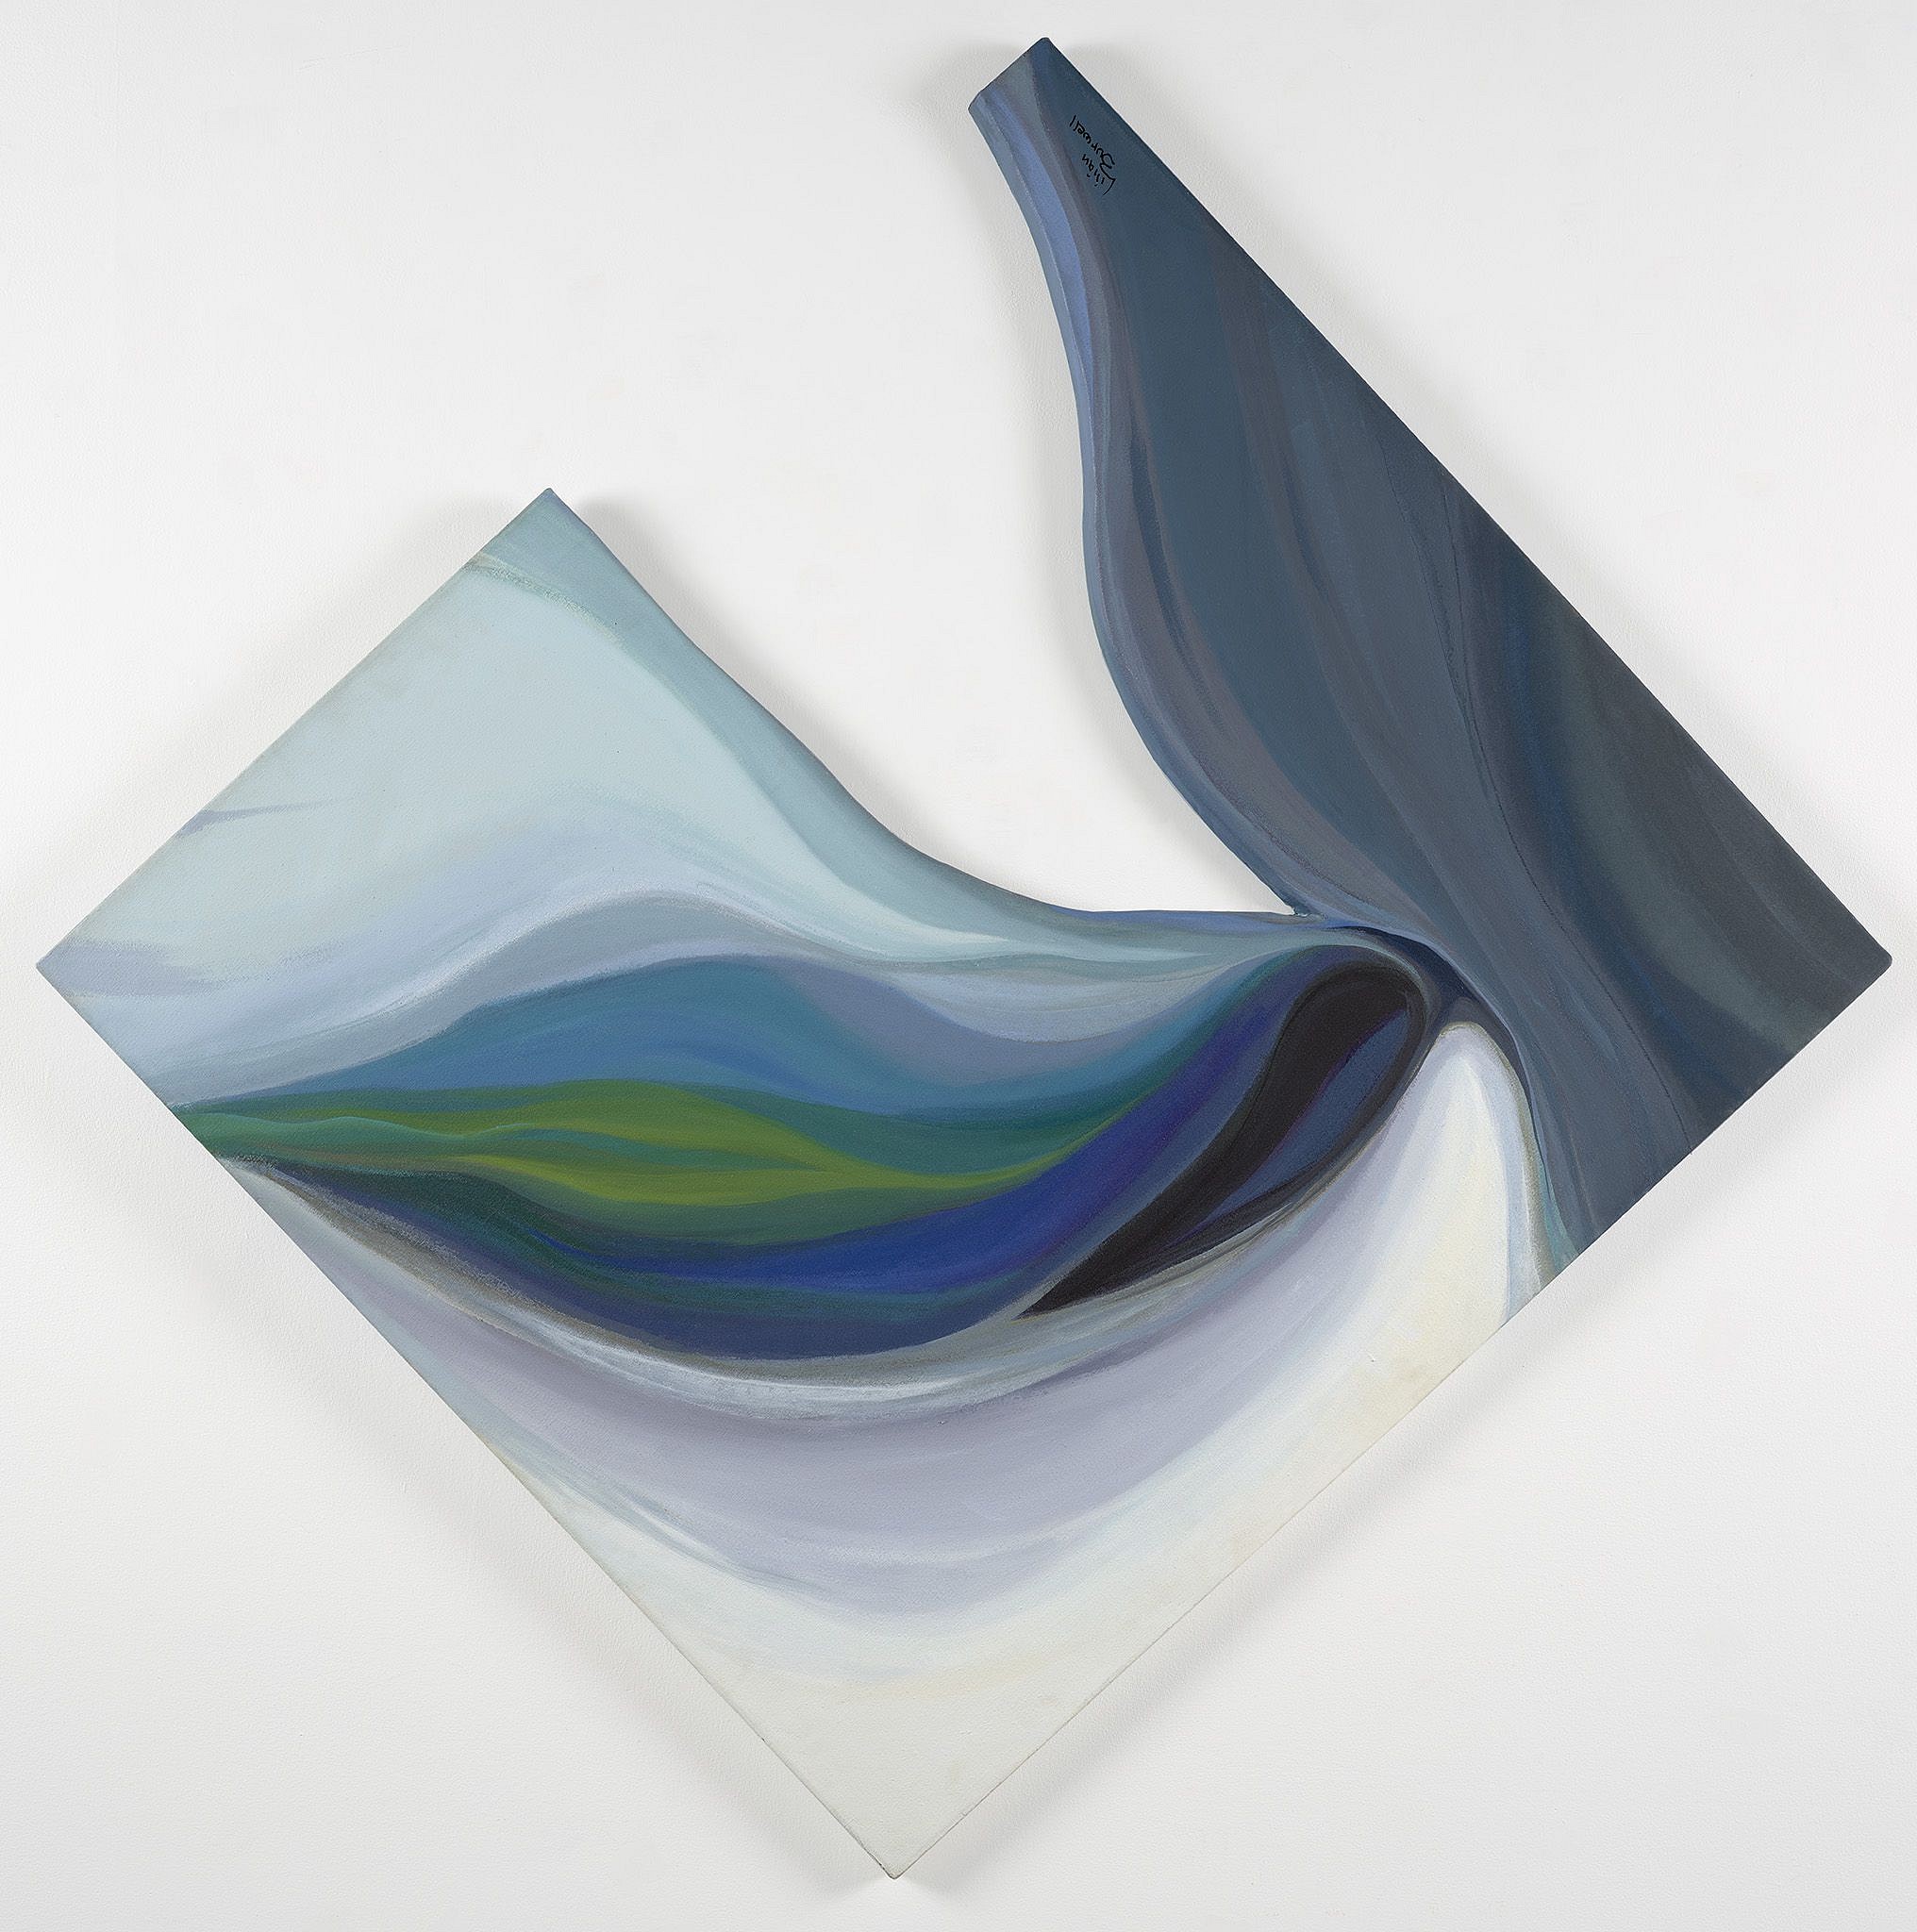 Info: Lilian Thomas Burwell: Soaring | Curated by Melissa Messina, Apr 22 - May 28, 2021